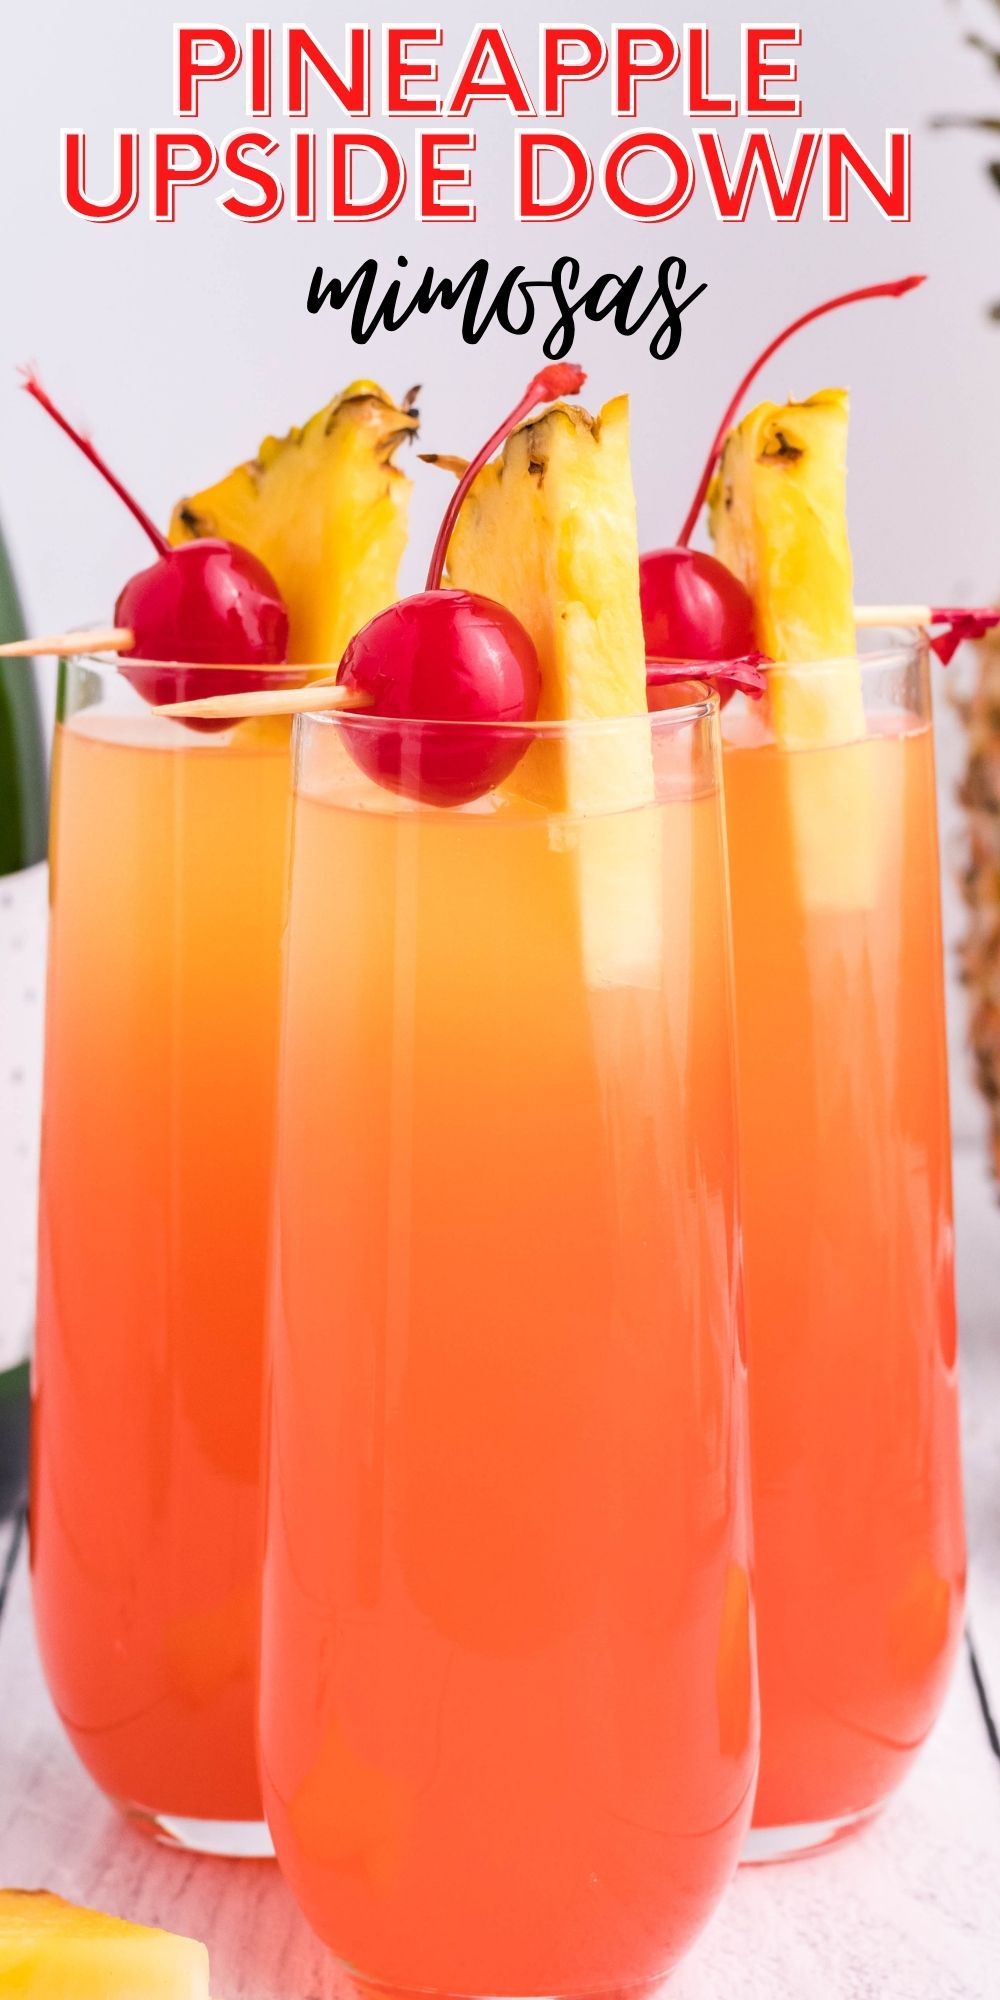 These Pineapple Upside Down Mimosas are deliciously addictive - a mix of classic mimosa and the flavors of sweet and tropical pineapple upside down cake! via @familyfresh